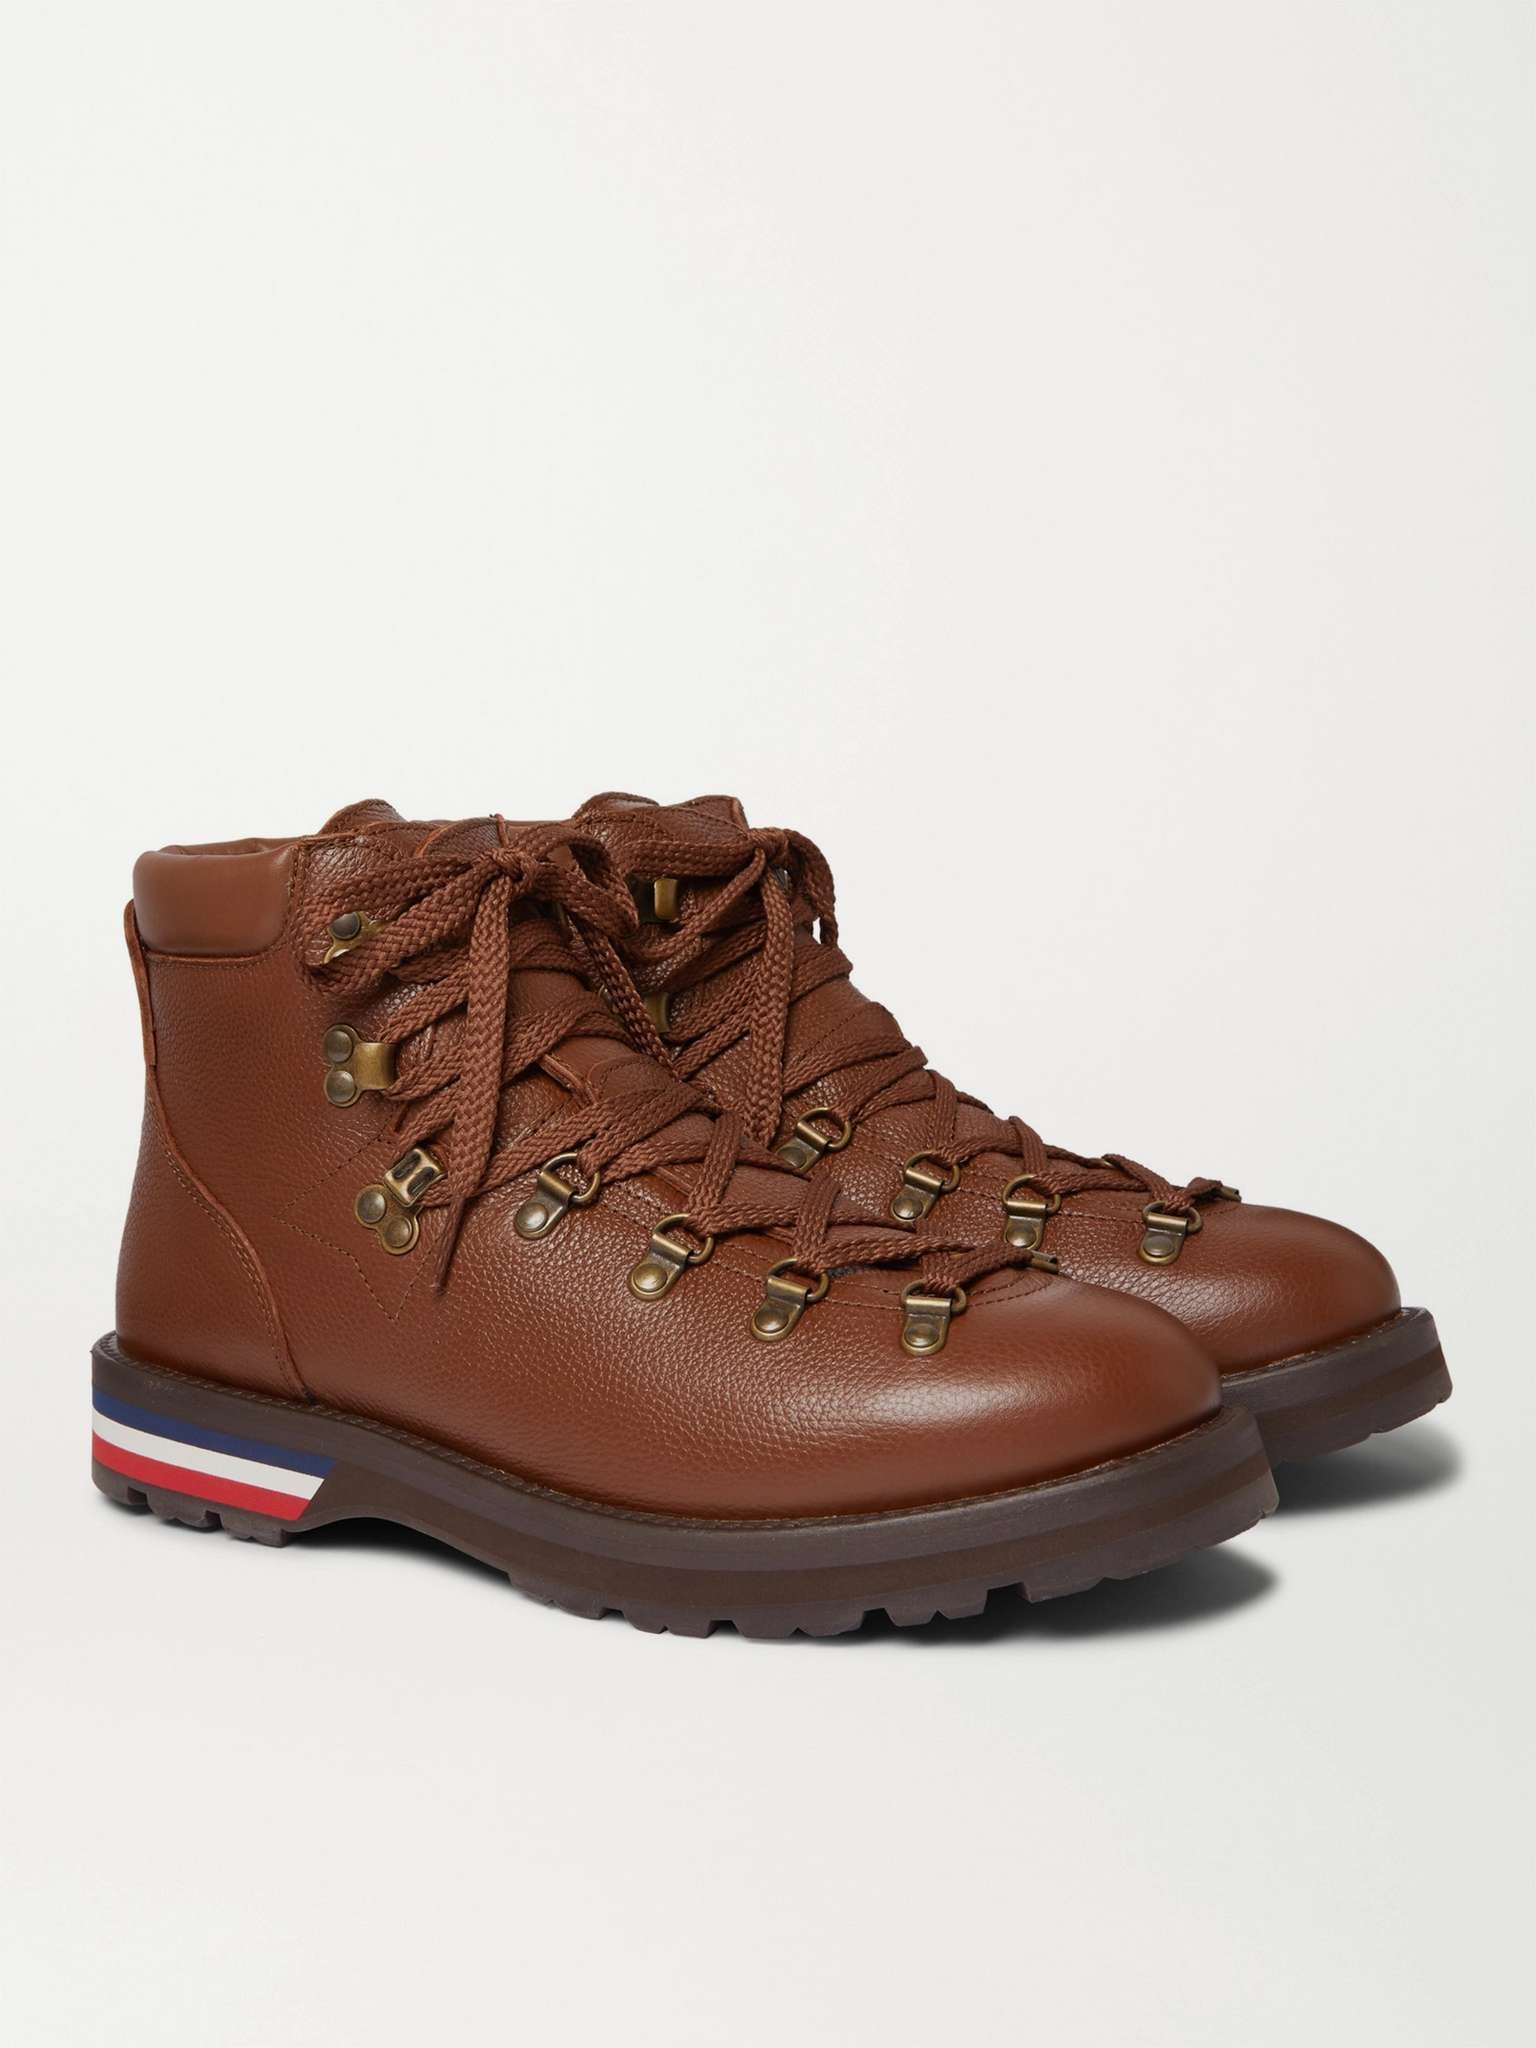 Striped Full-Grain Leather Boots - 4